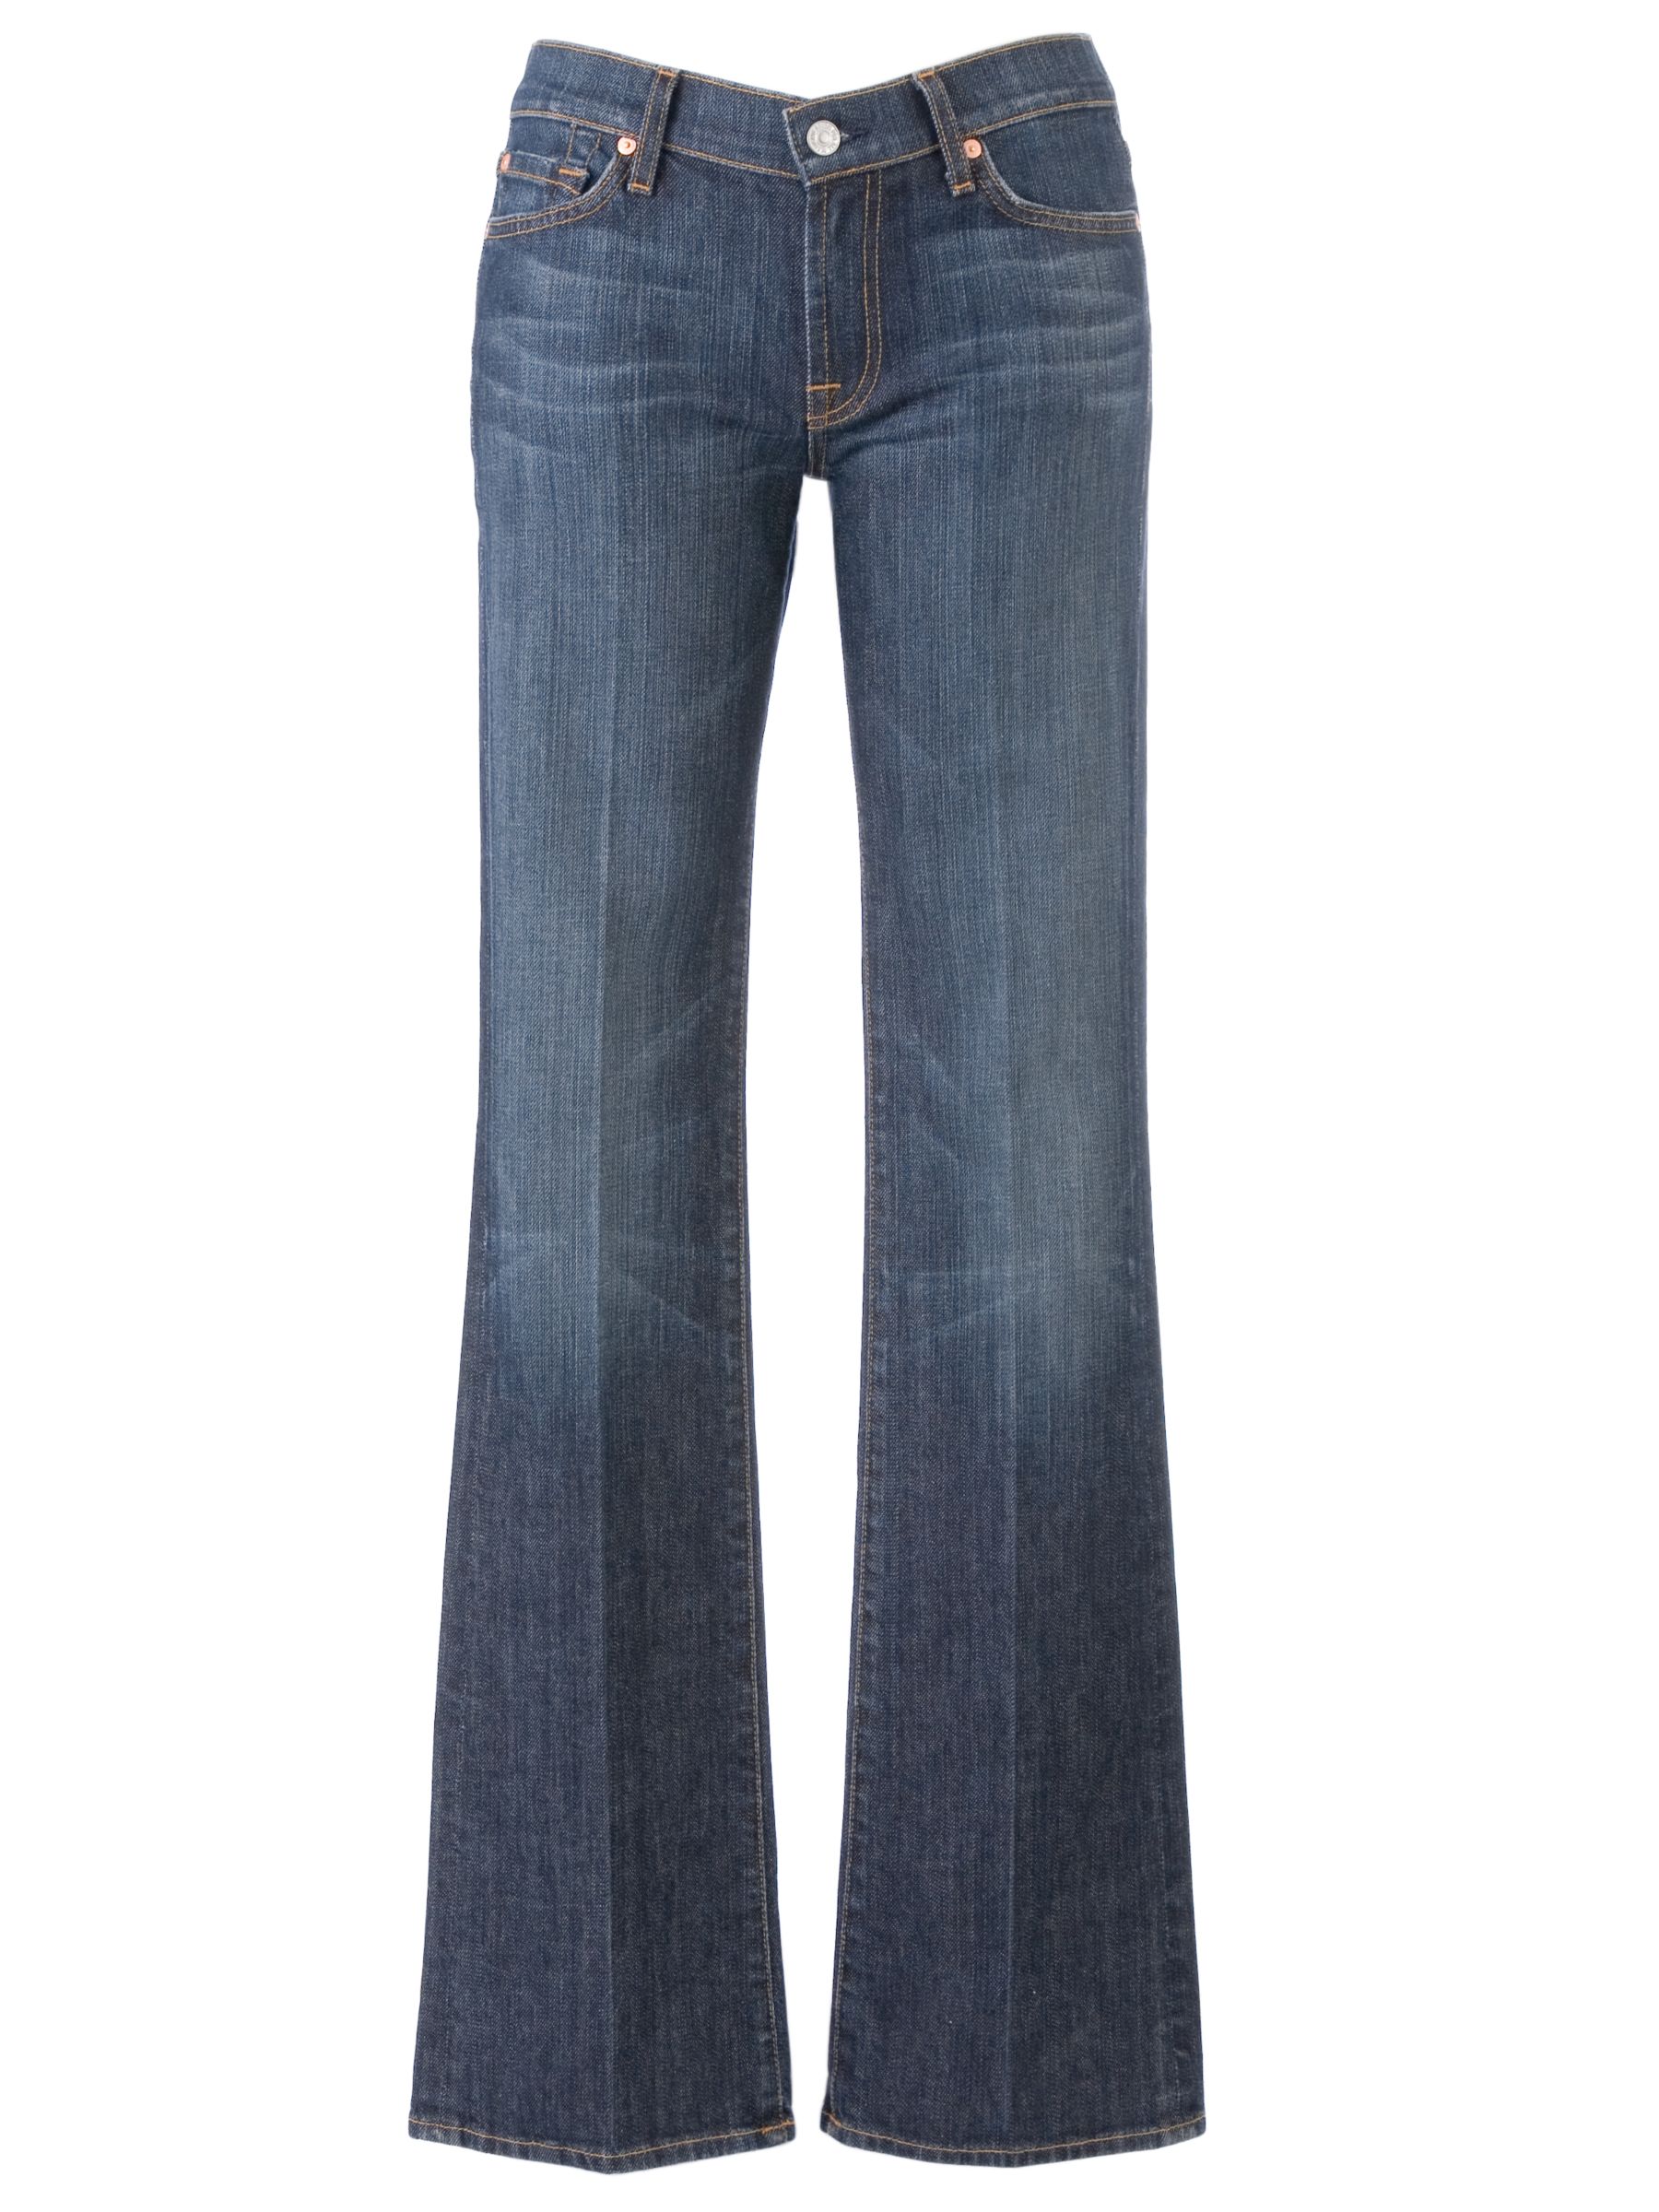 7 For All Mankind Stretch Mid-Rise Bootcut Jeans, New York Dark at John Lewis